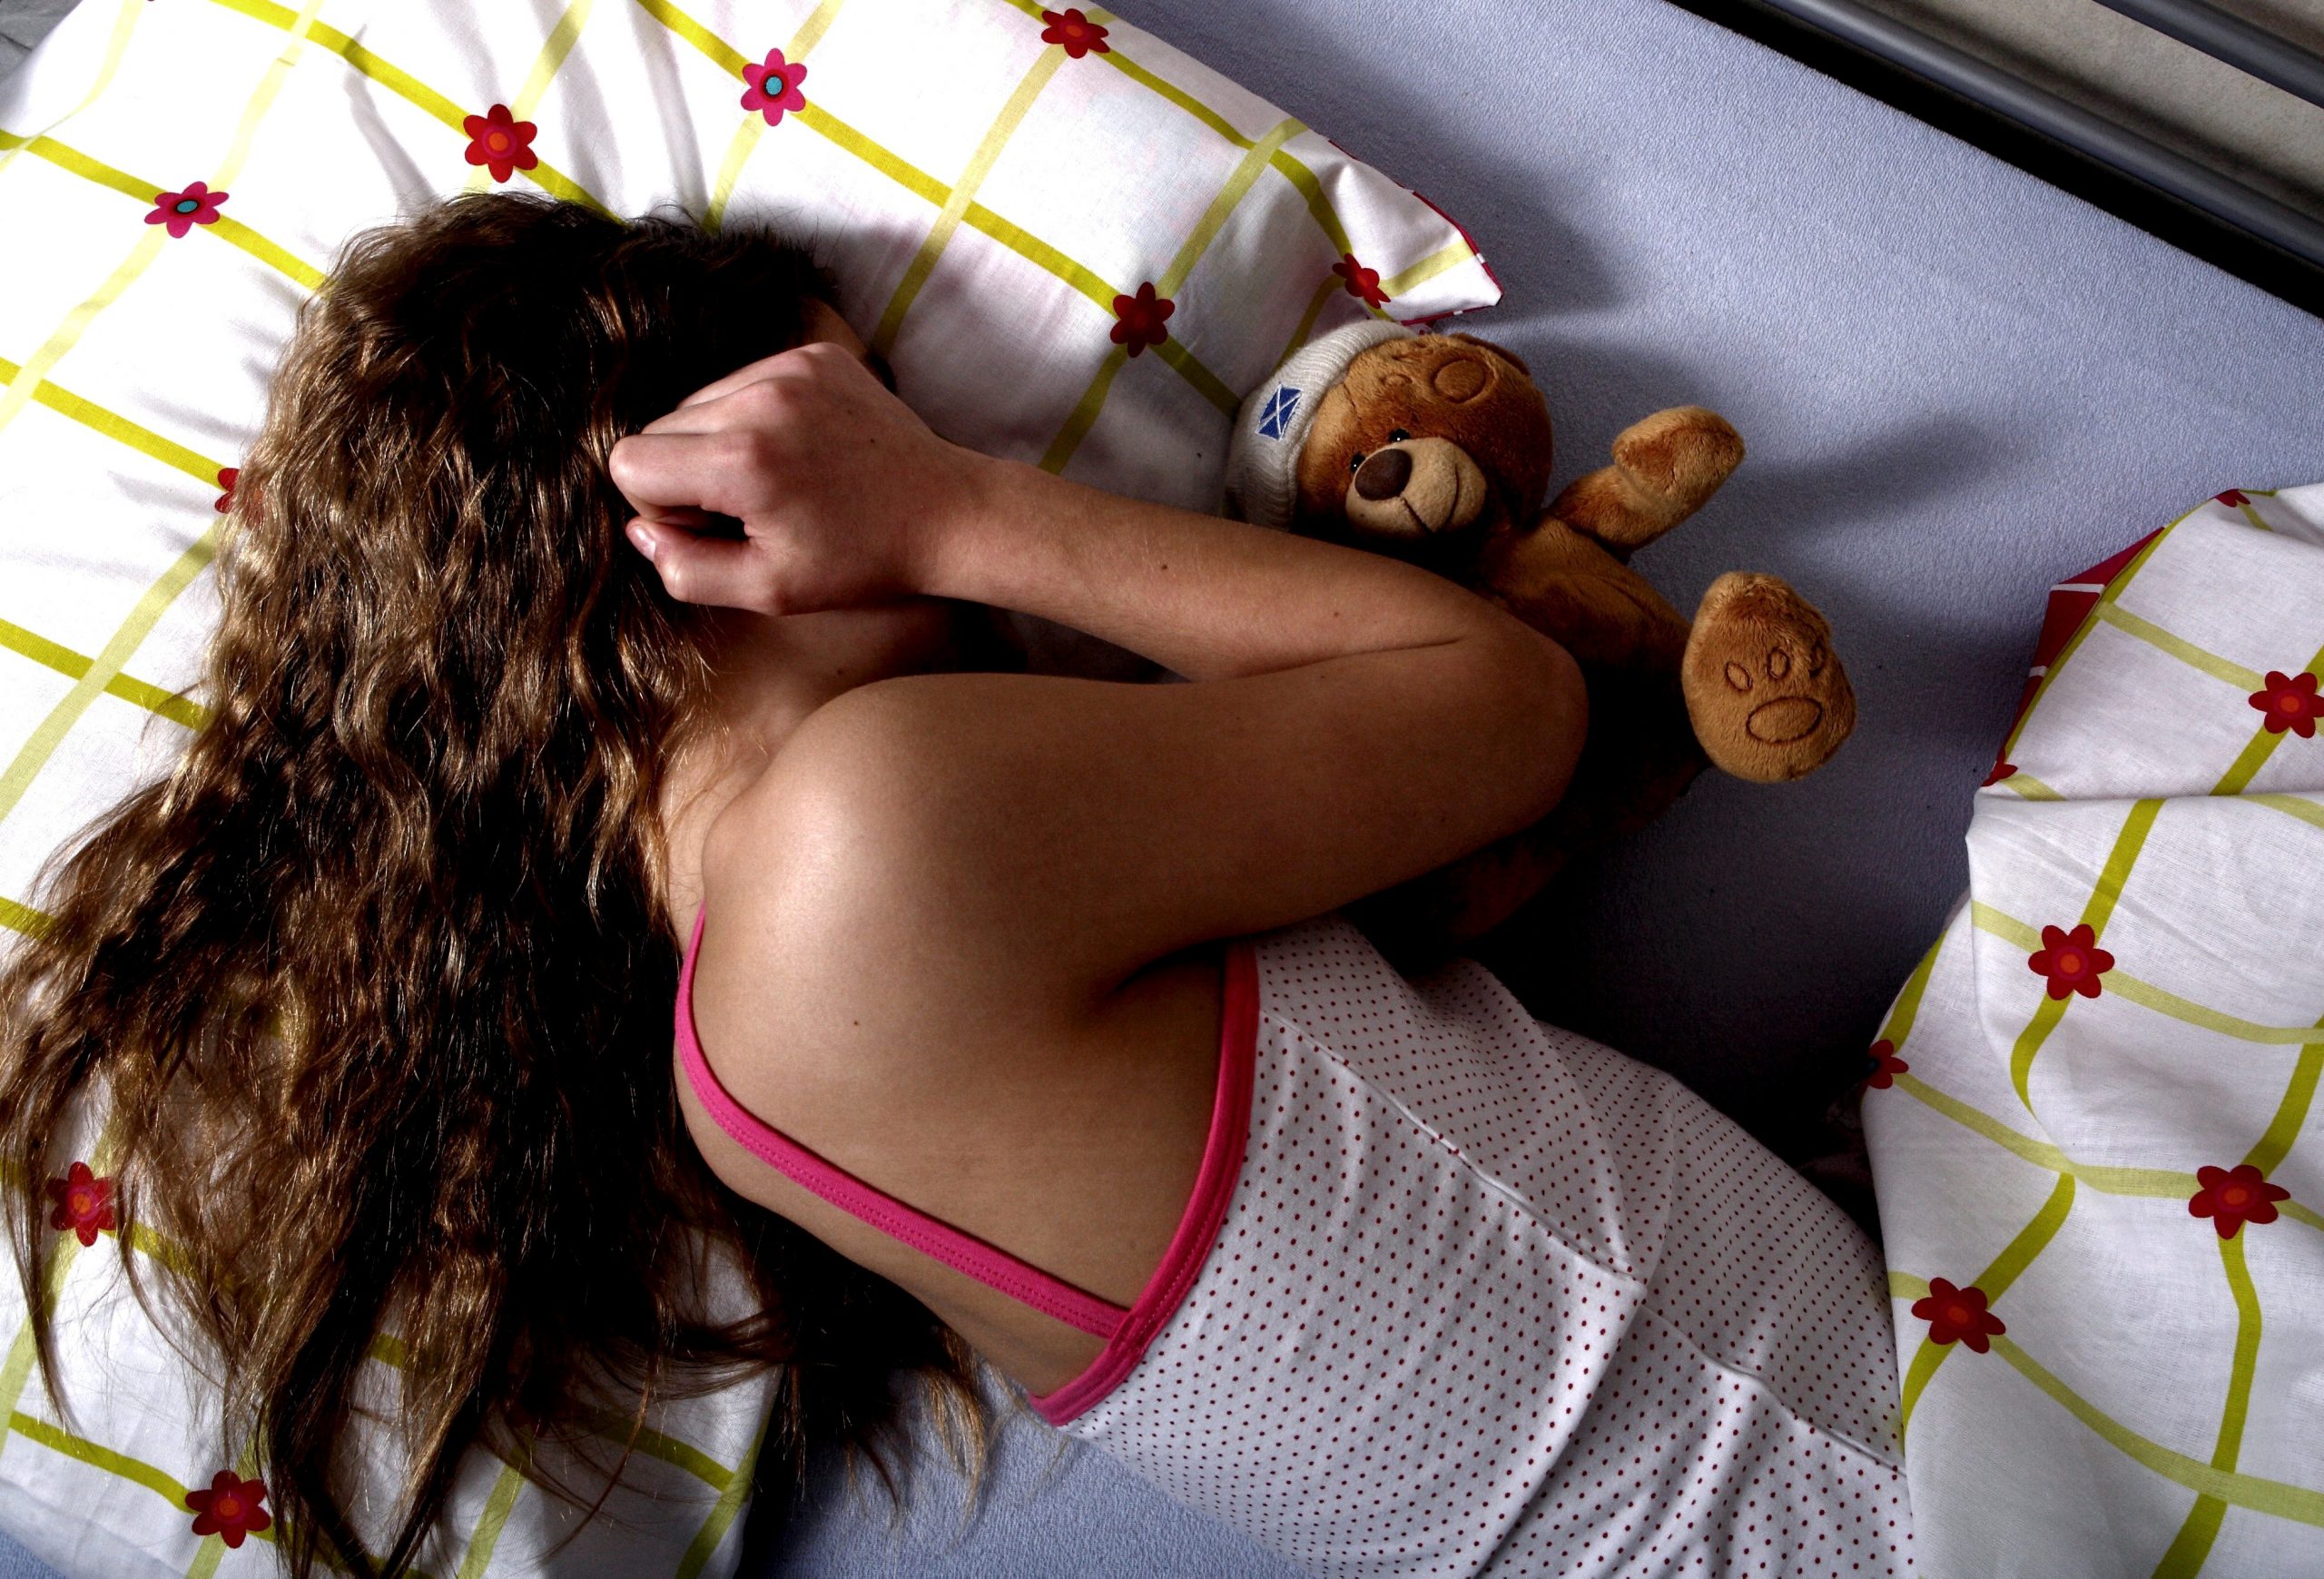 IFather got daughter,14, pregnant after years of abuse in Alicante area of Spain